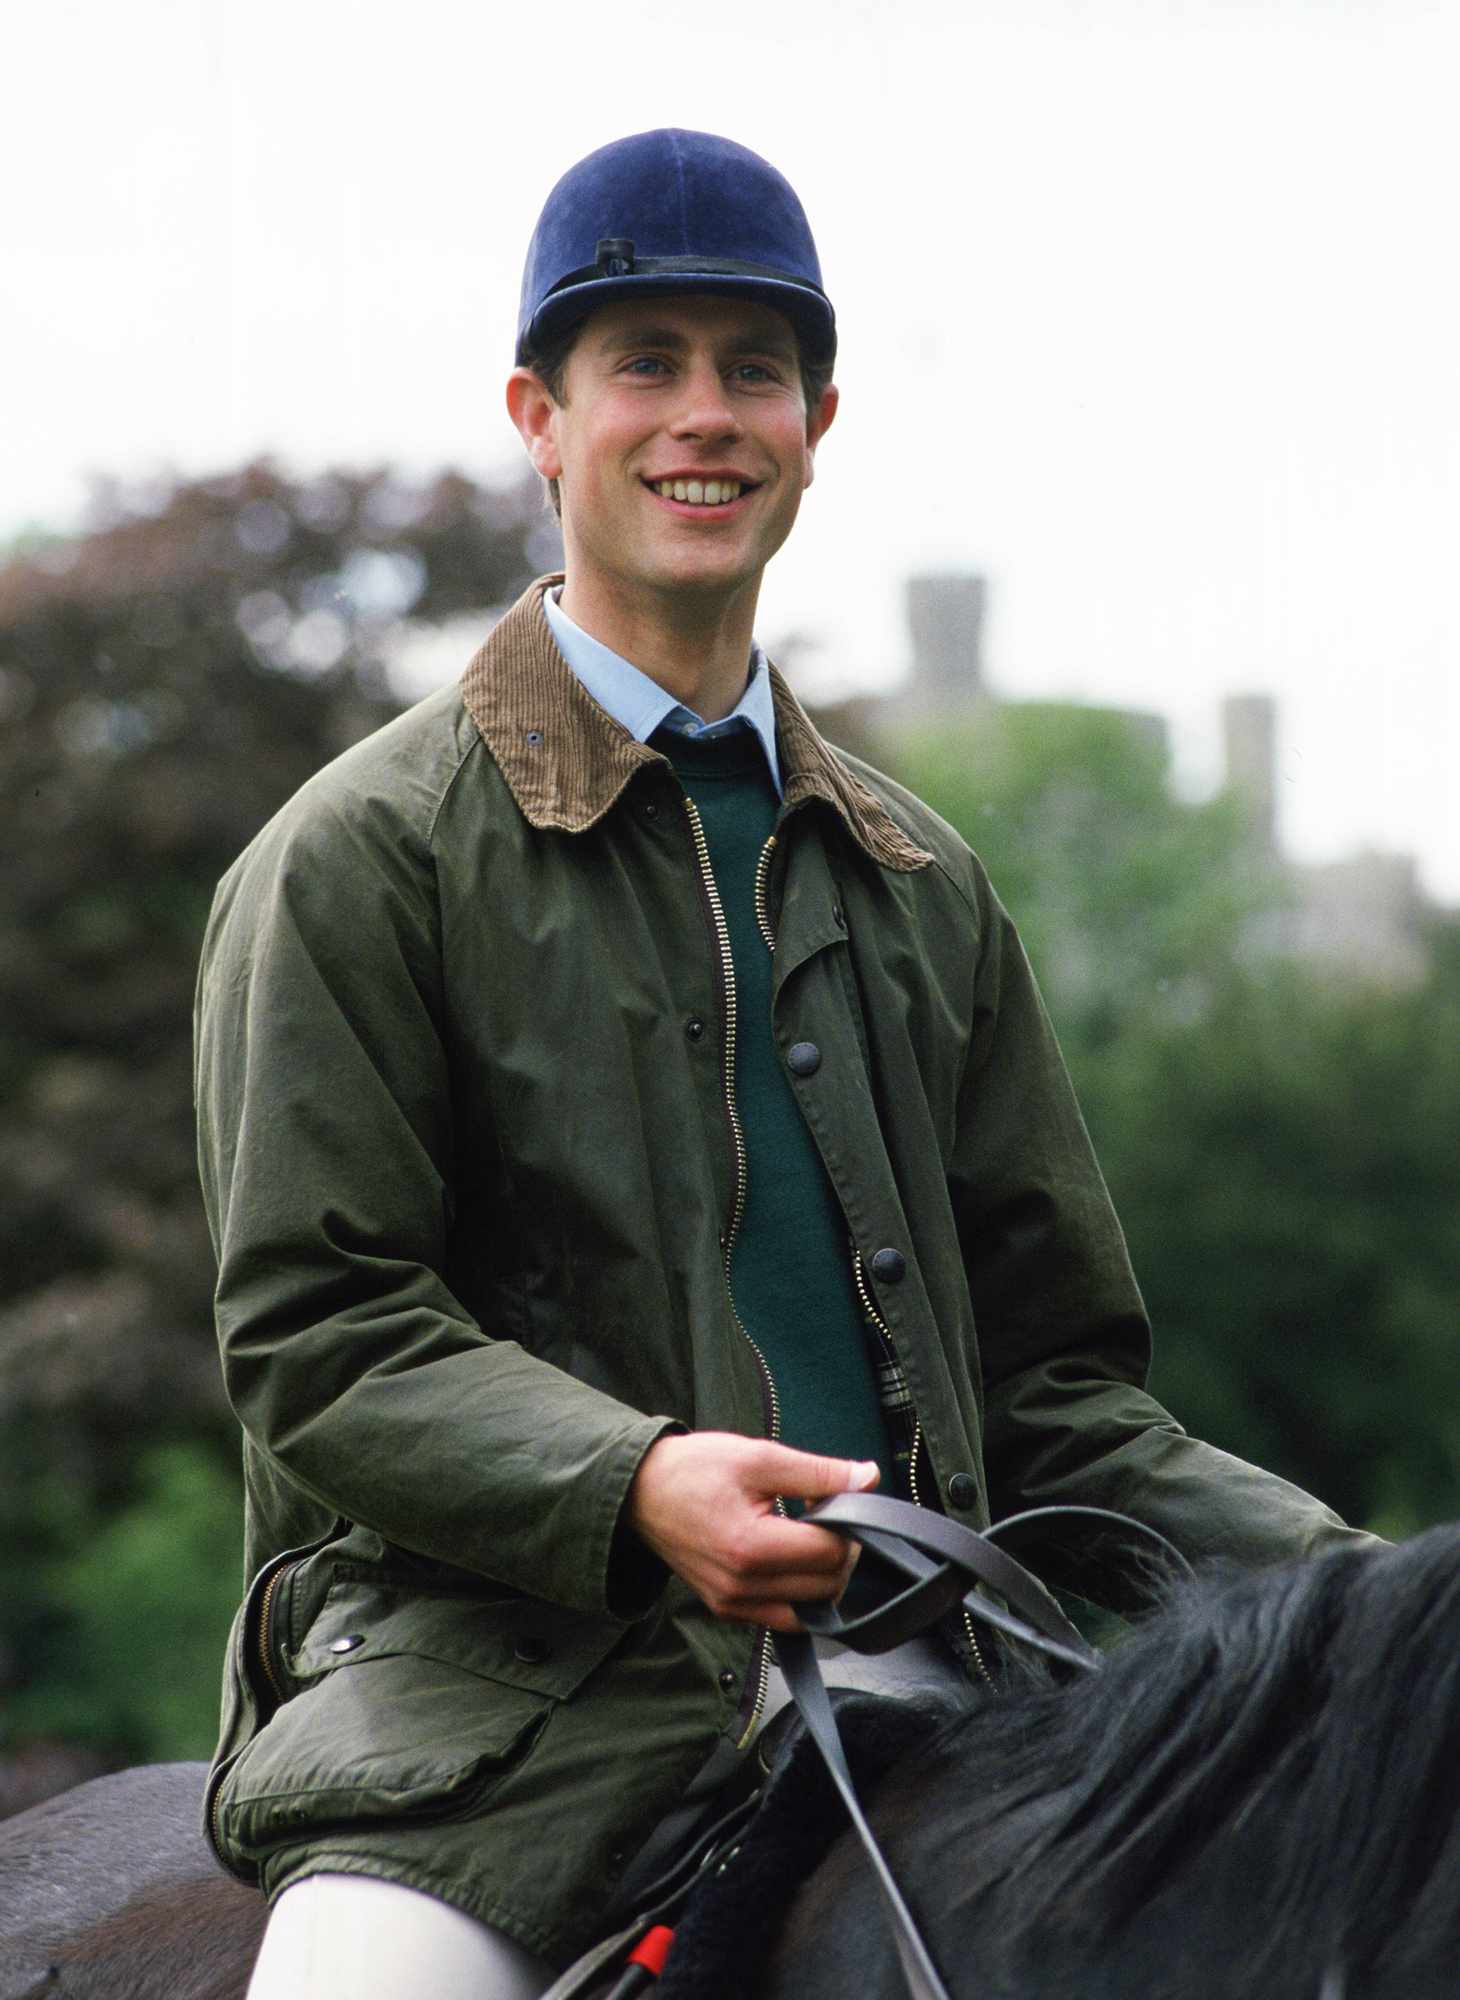 Prince Edward, Earl of Wessex at the Royal Windsor Horse Show